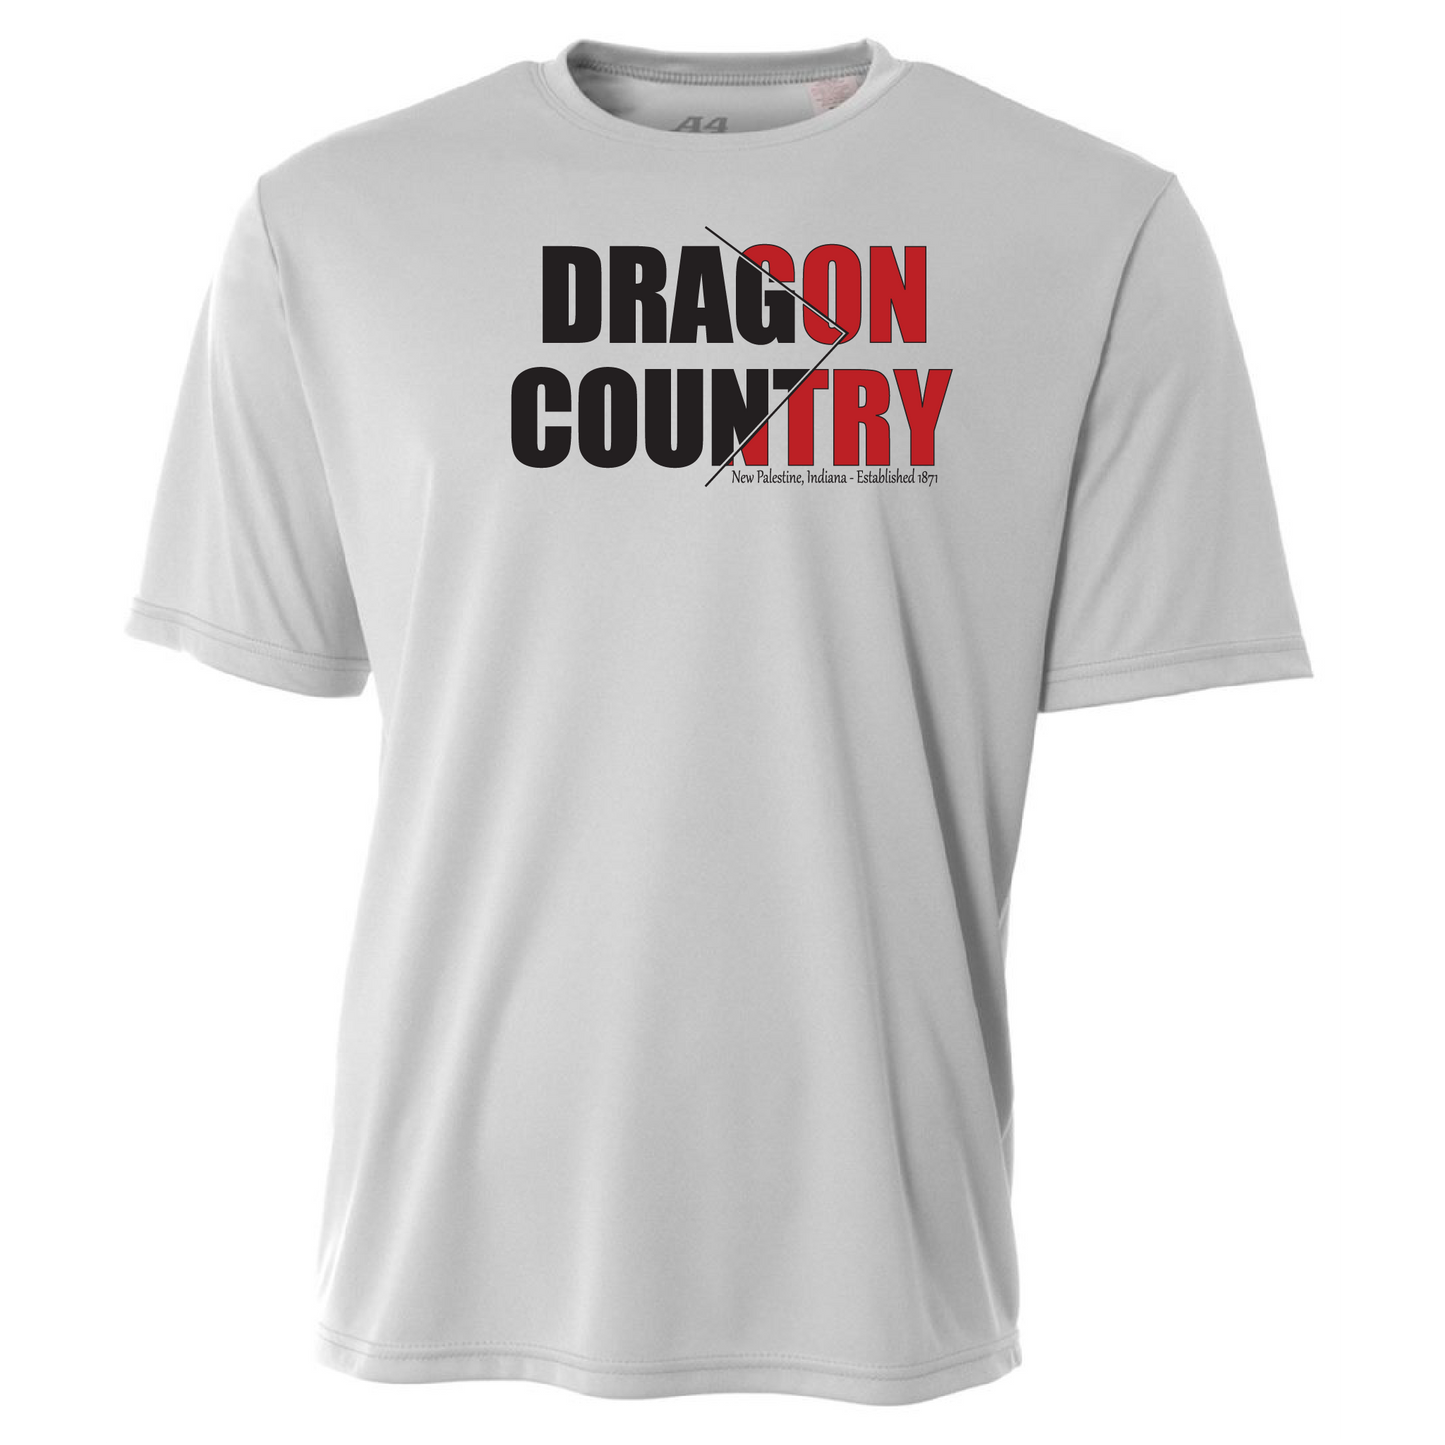 Mens S/S T-Shirt - Dragon Country Arrowed